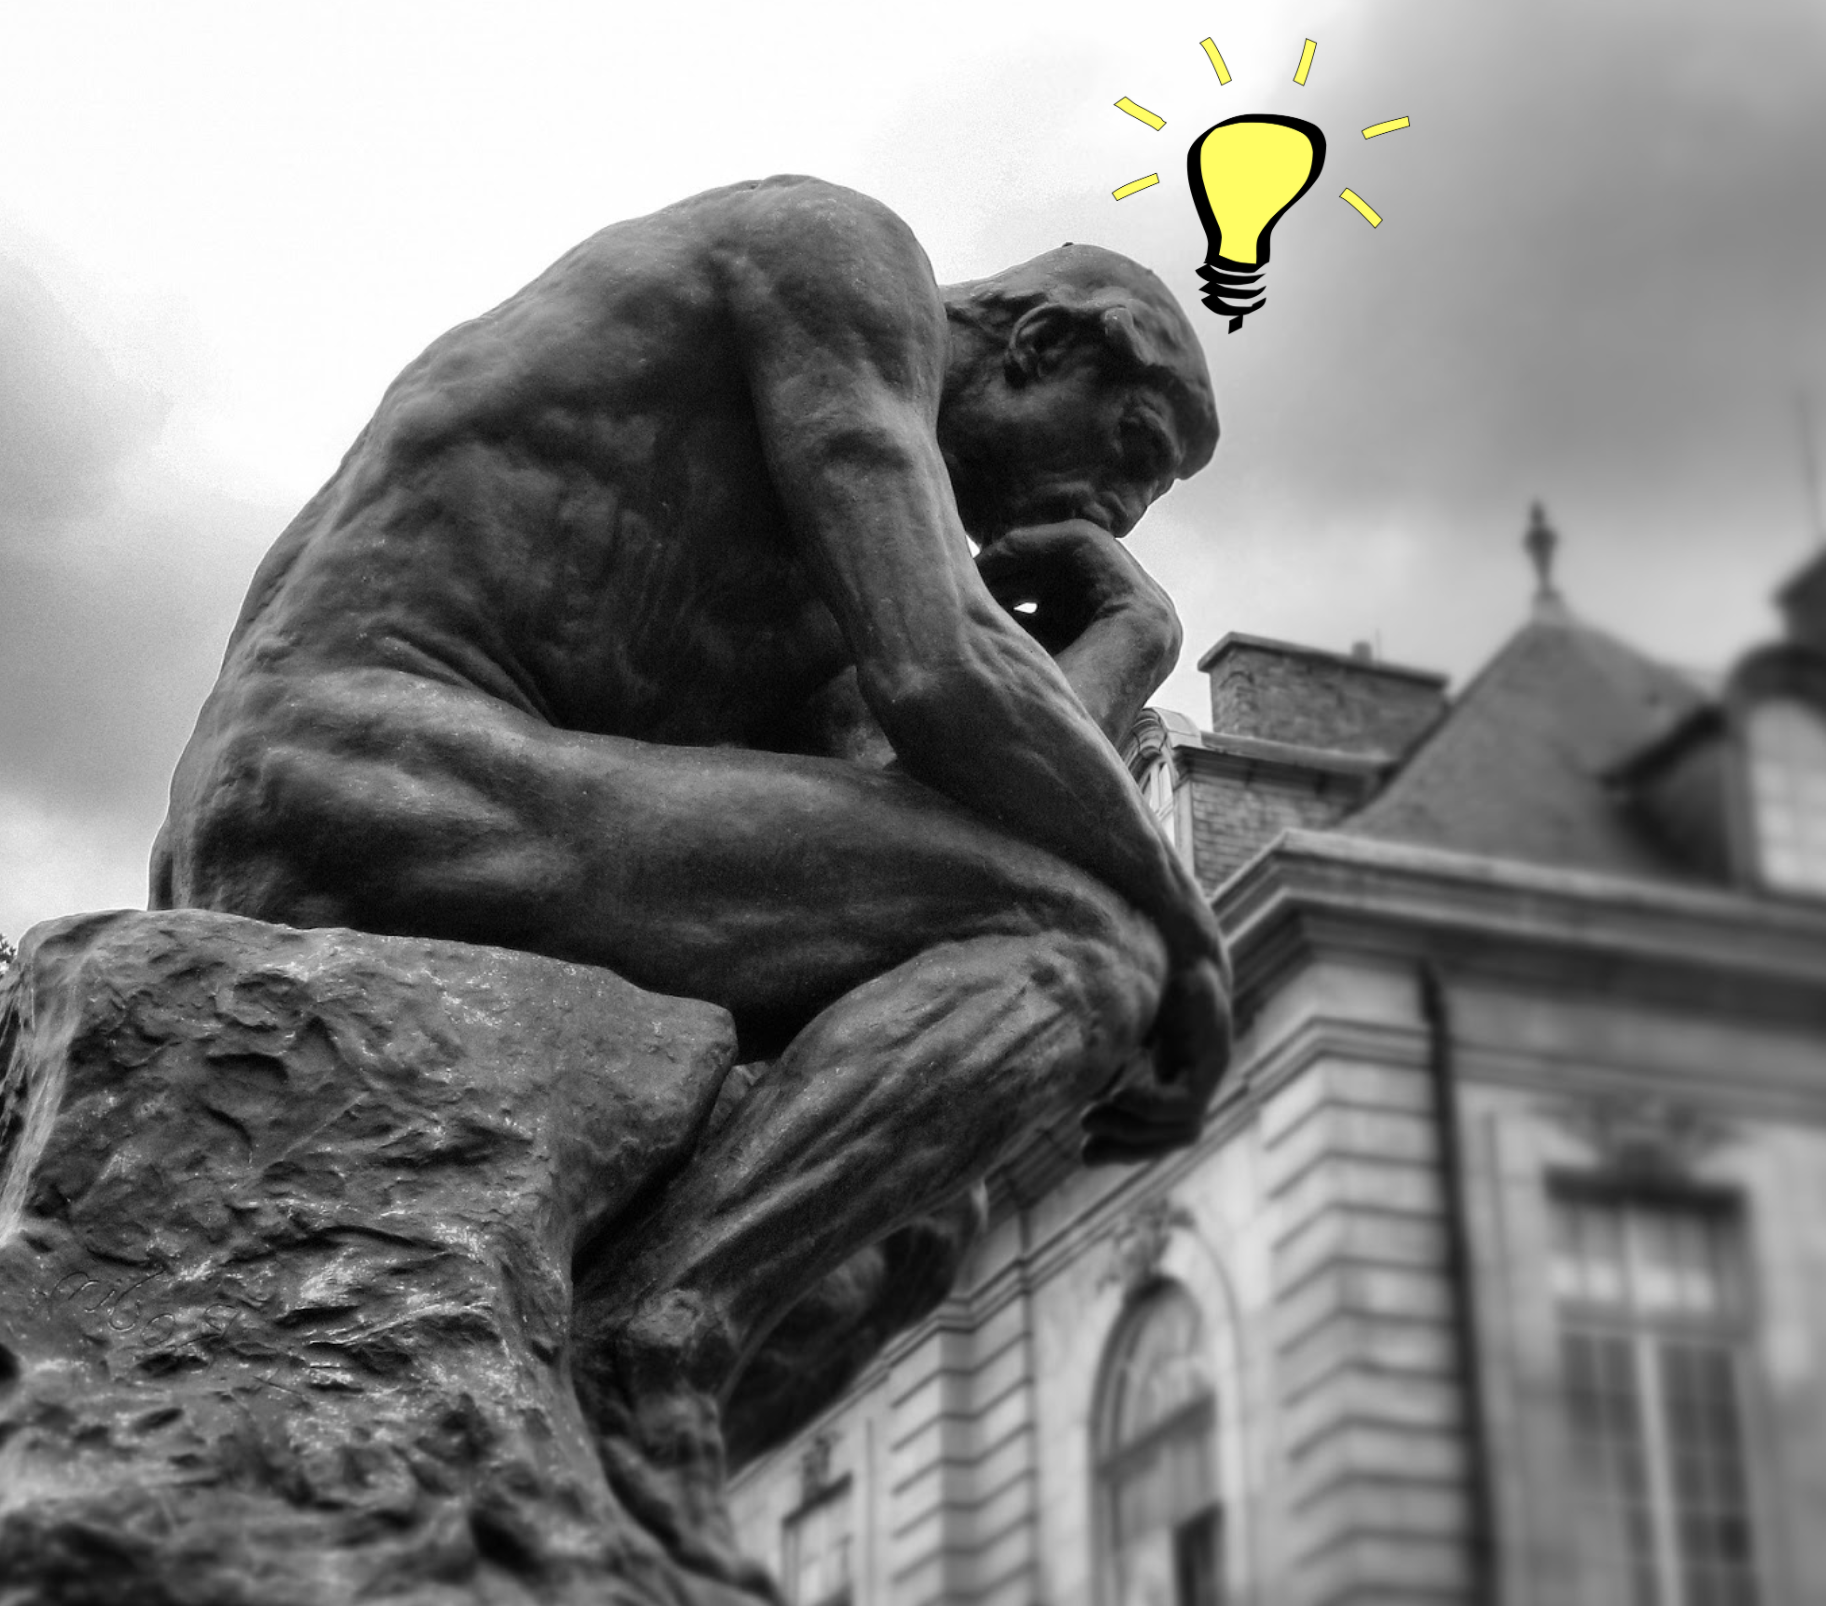 statue-thinking-with-light-bulb-graphic